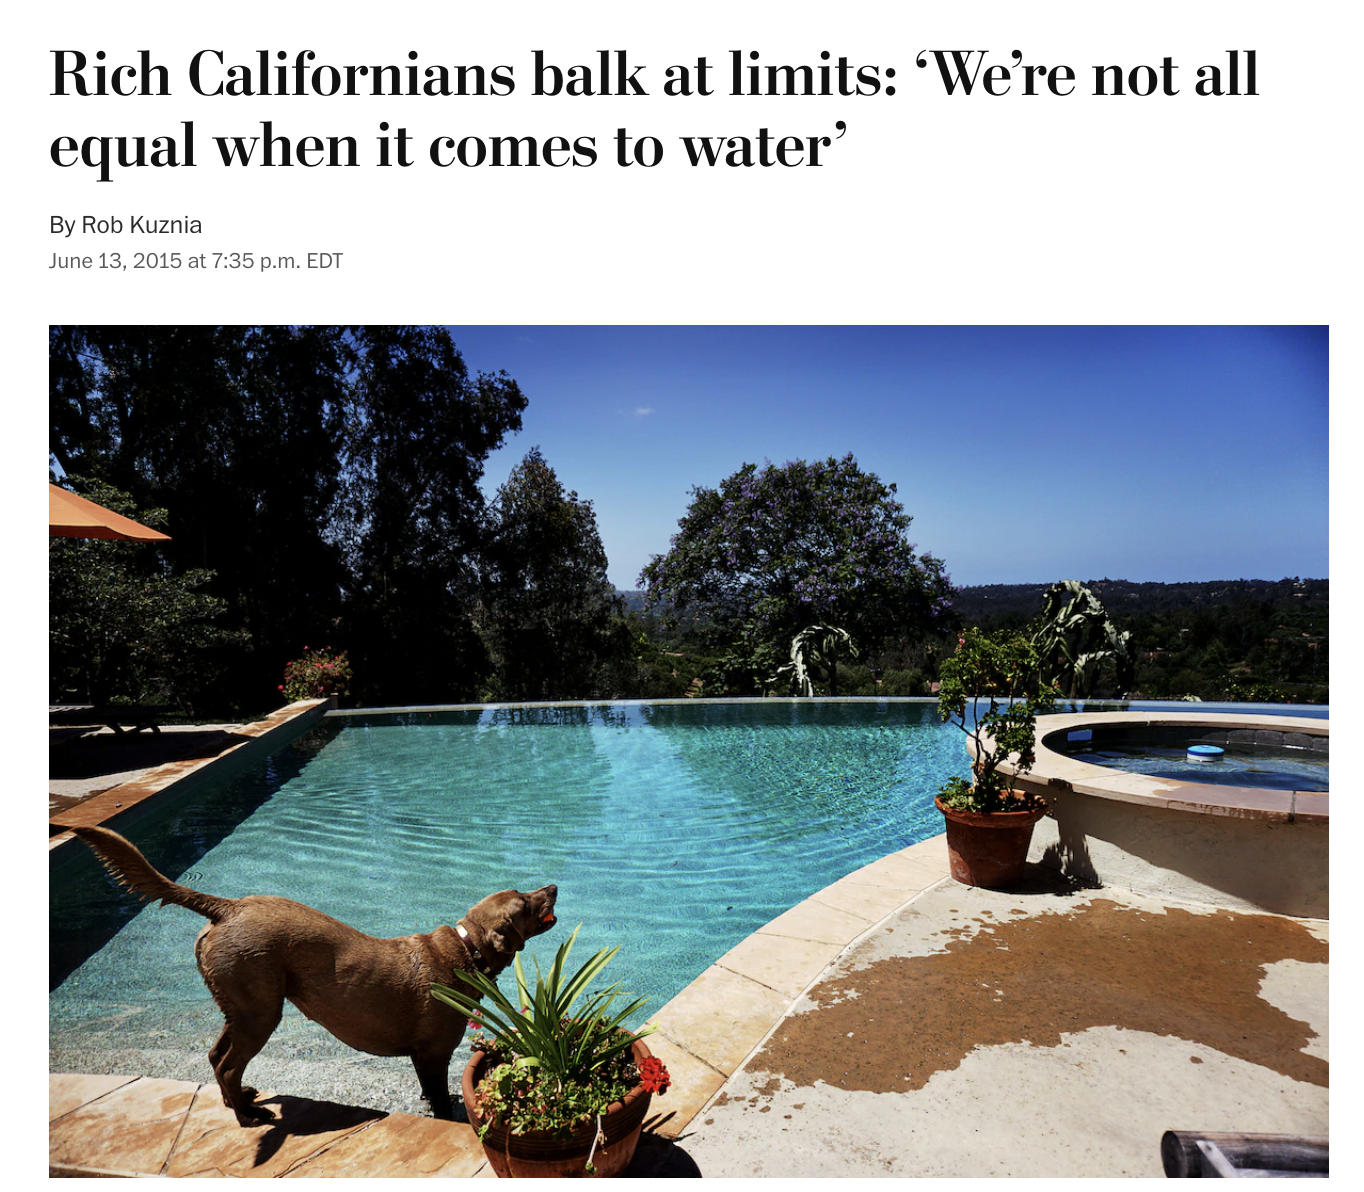 labrador retriever - Rich Californians balk at limits 'We're not all equal when it comes to water' By Rob Kuznia at p.m. Edt